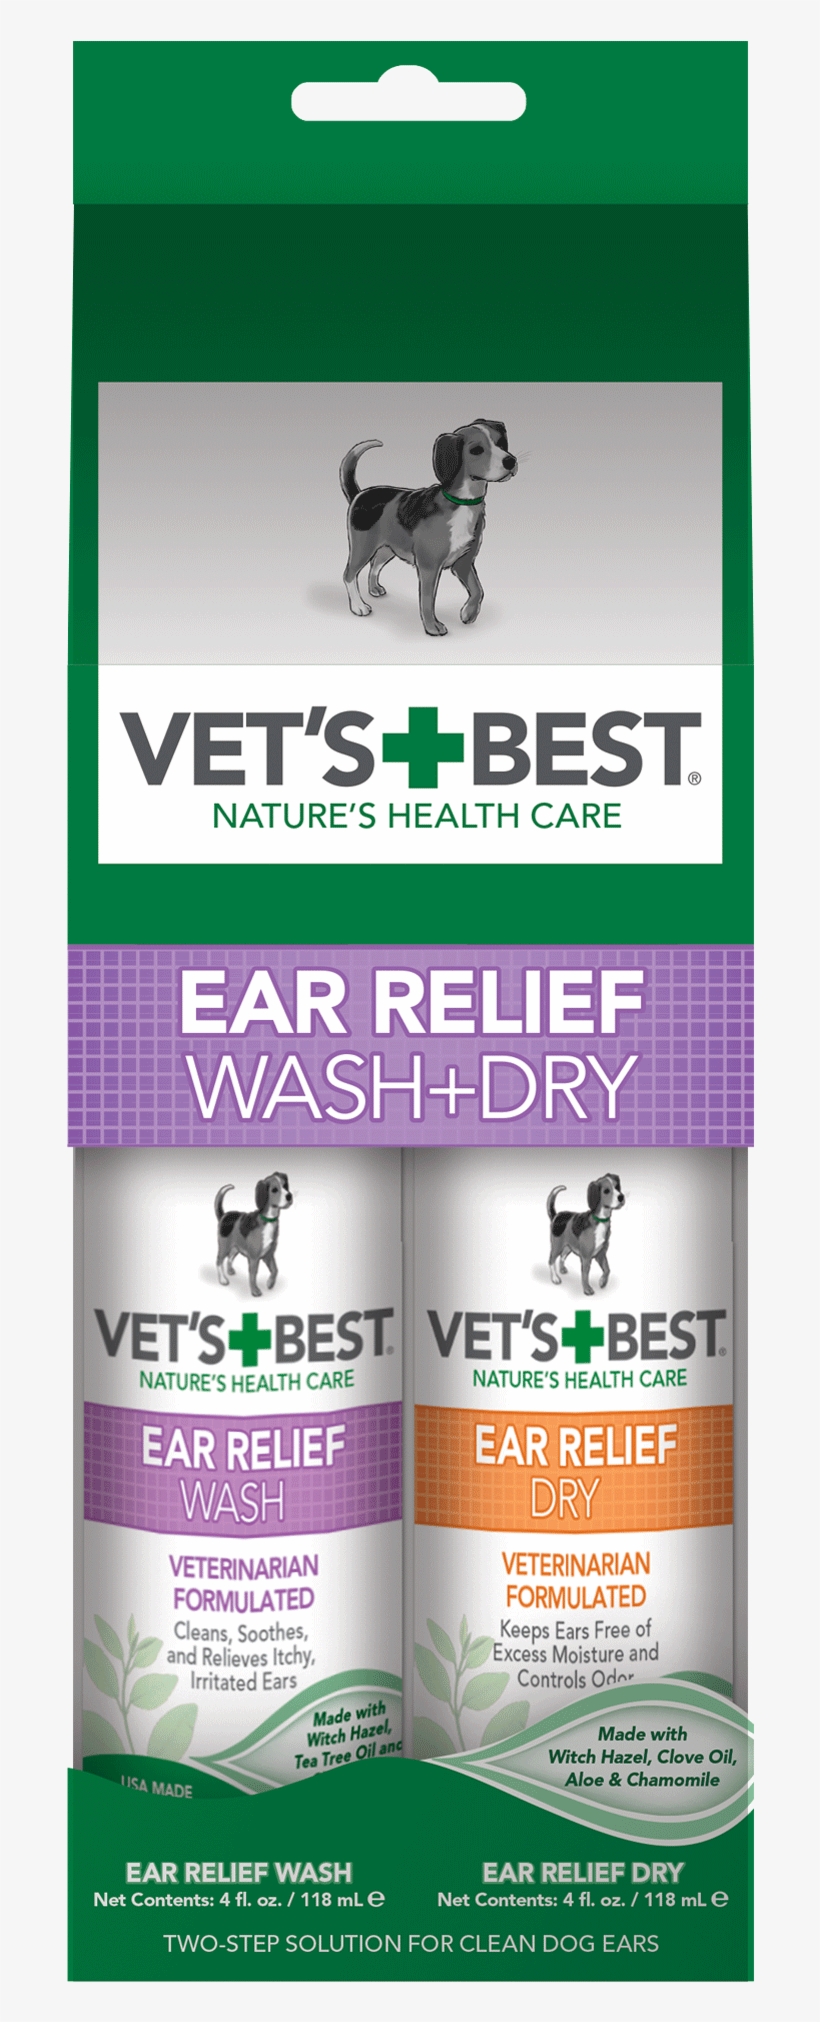 Vet's Best Dog Ear Cleaner Kit, Ear Relief Wash & Dry - Vet's Best Allergy Itch Relief Dog Shampoo, 16 Oz, transparent png #1920020